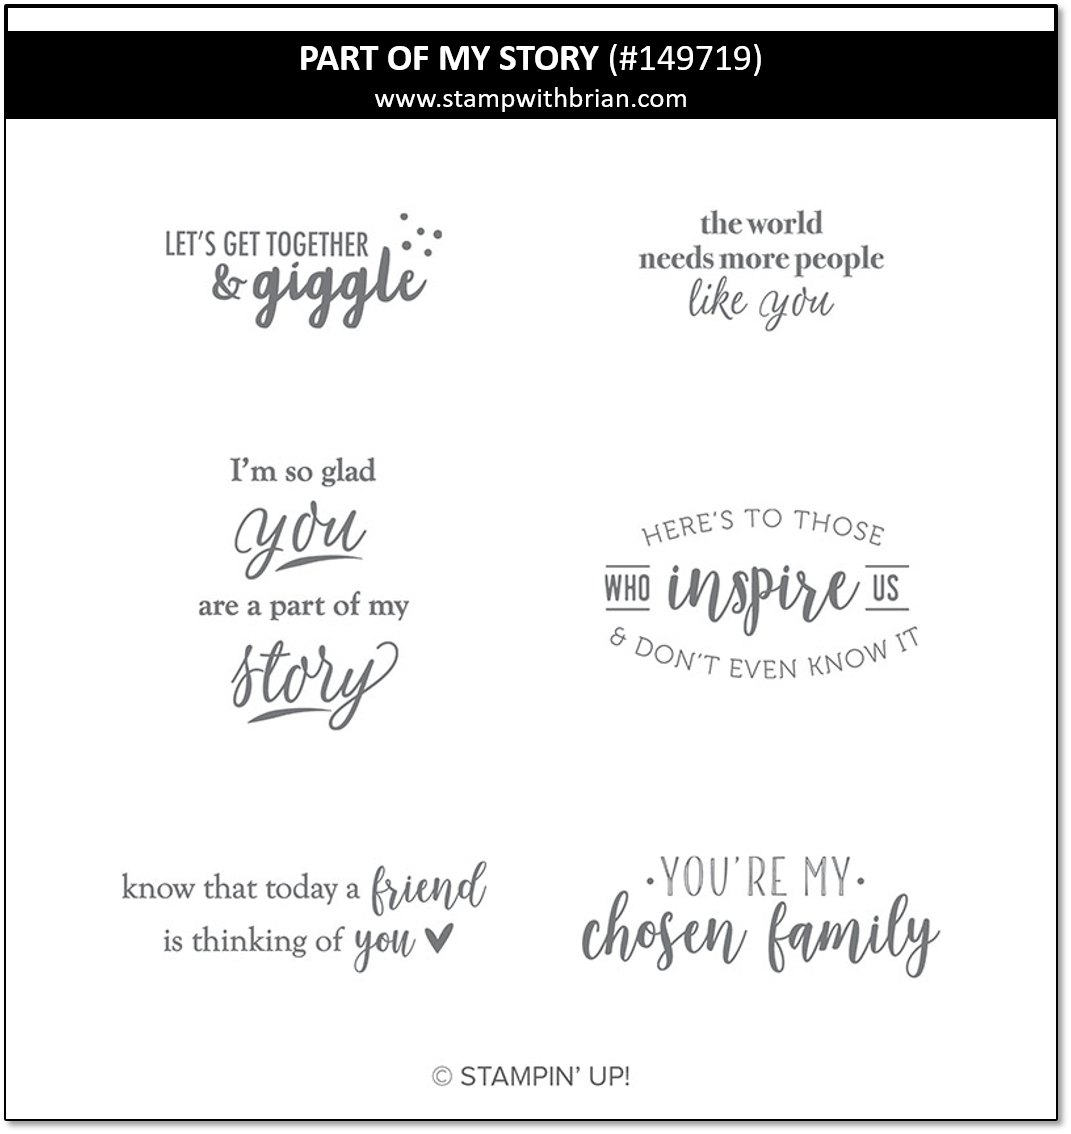 Part of My Story, Stampin' Up!, 2019 Sale-a-Bration 149719